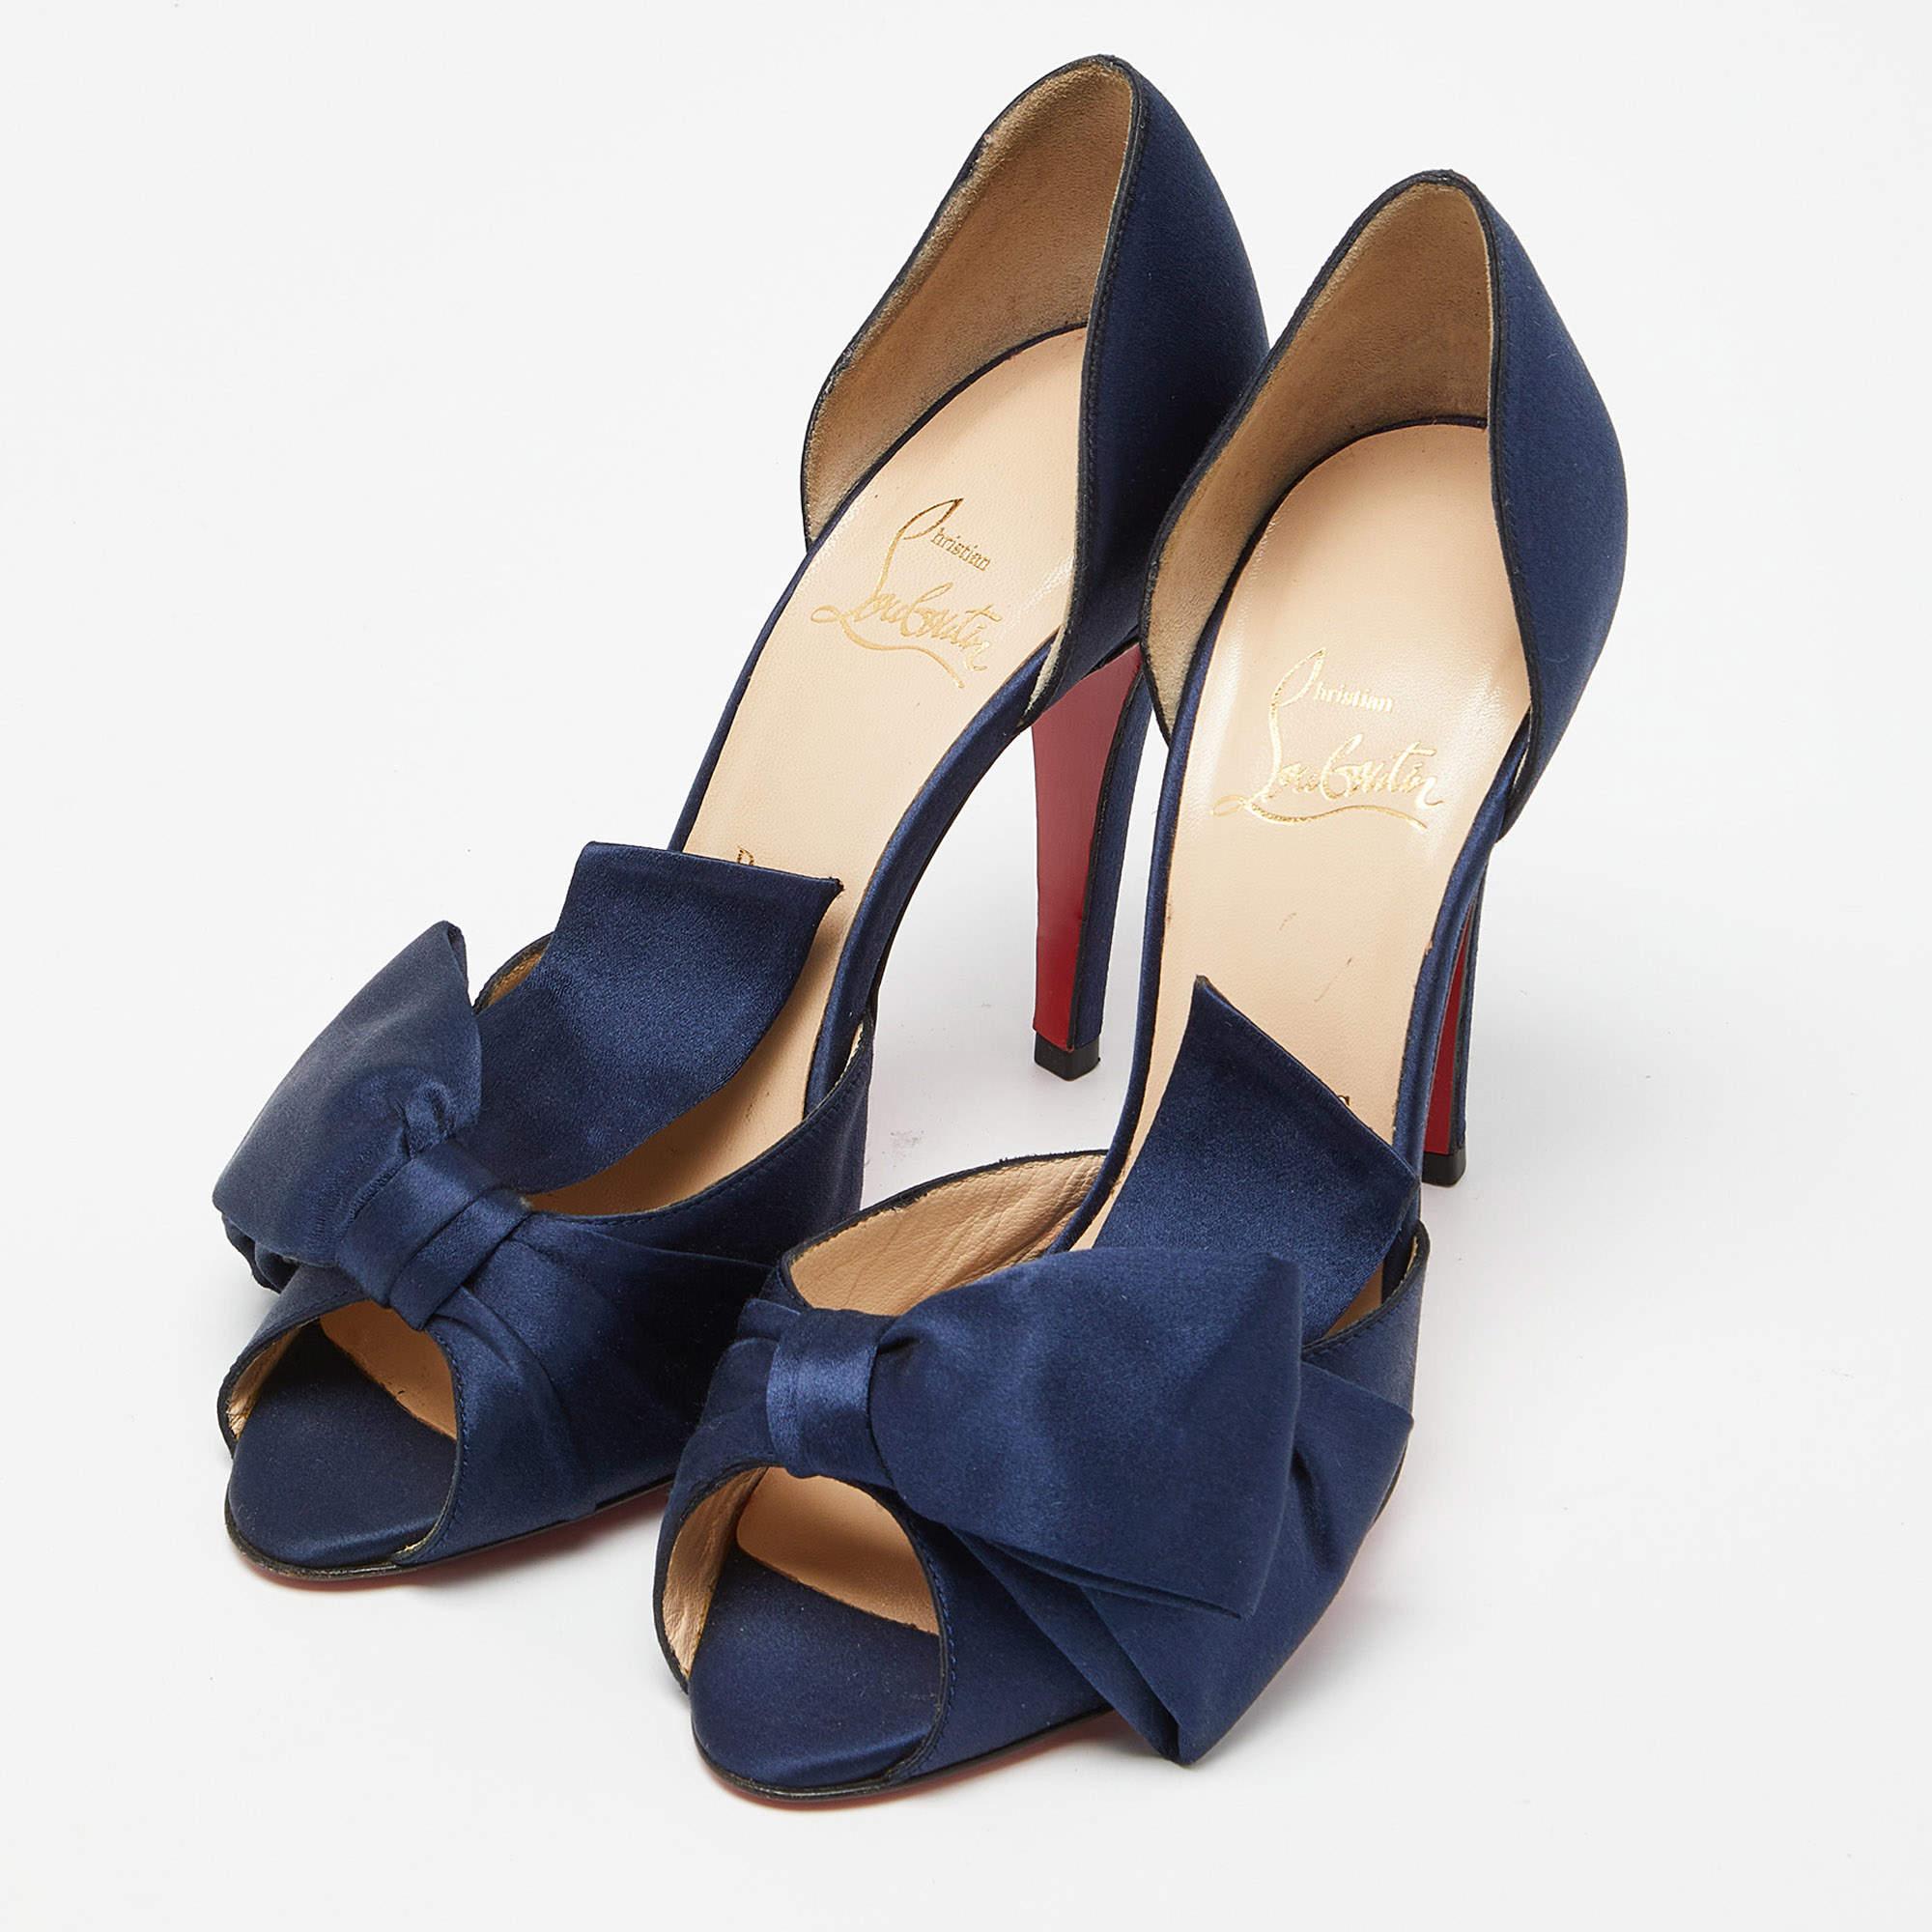 Perfectly sewn and finished to ensure an elegant look and fit, these Christian Louboutin shoes are a purchase you'll love flaunting. They look great on the feet.

